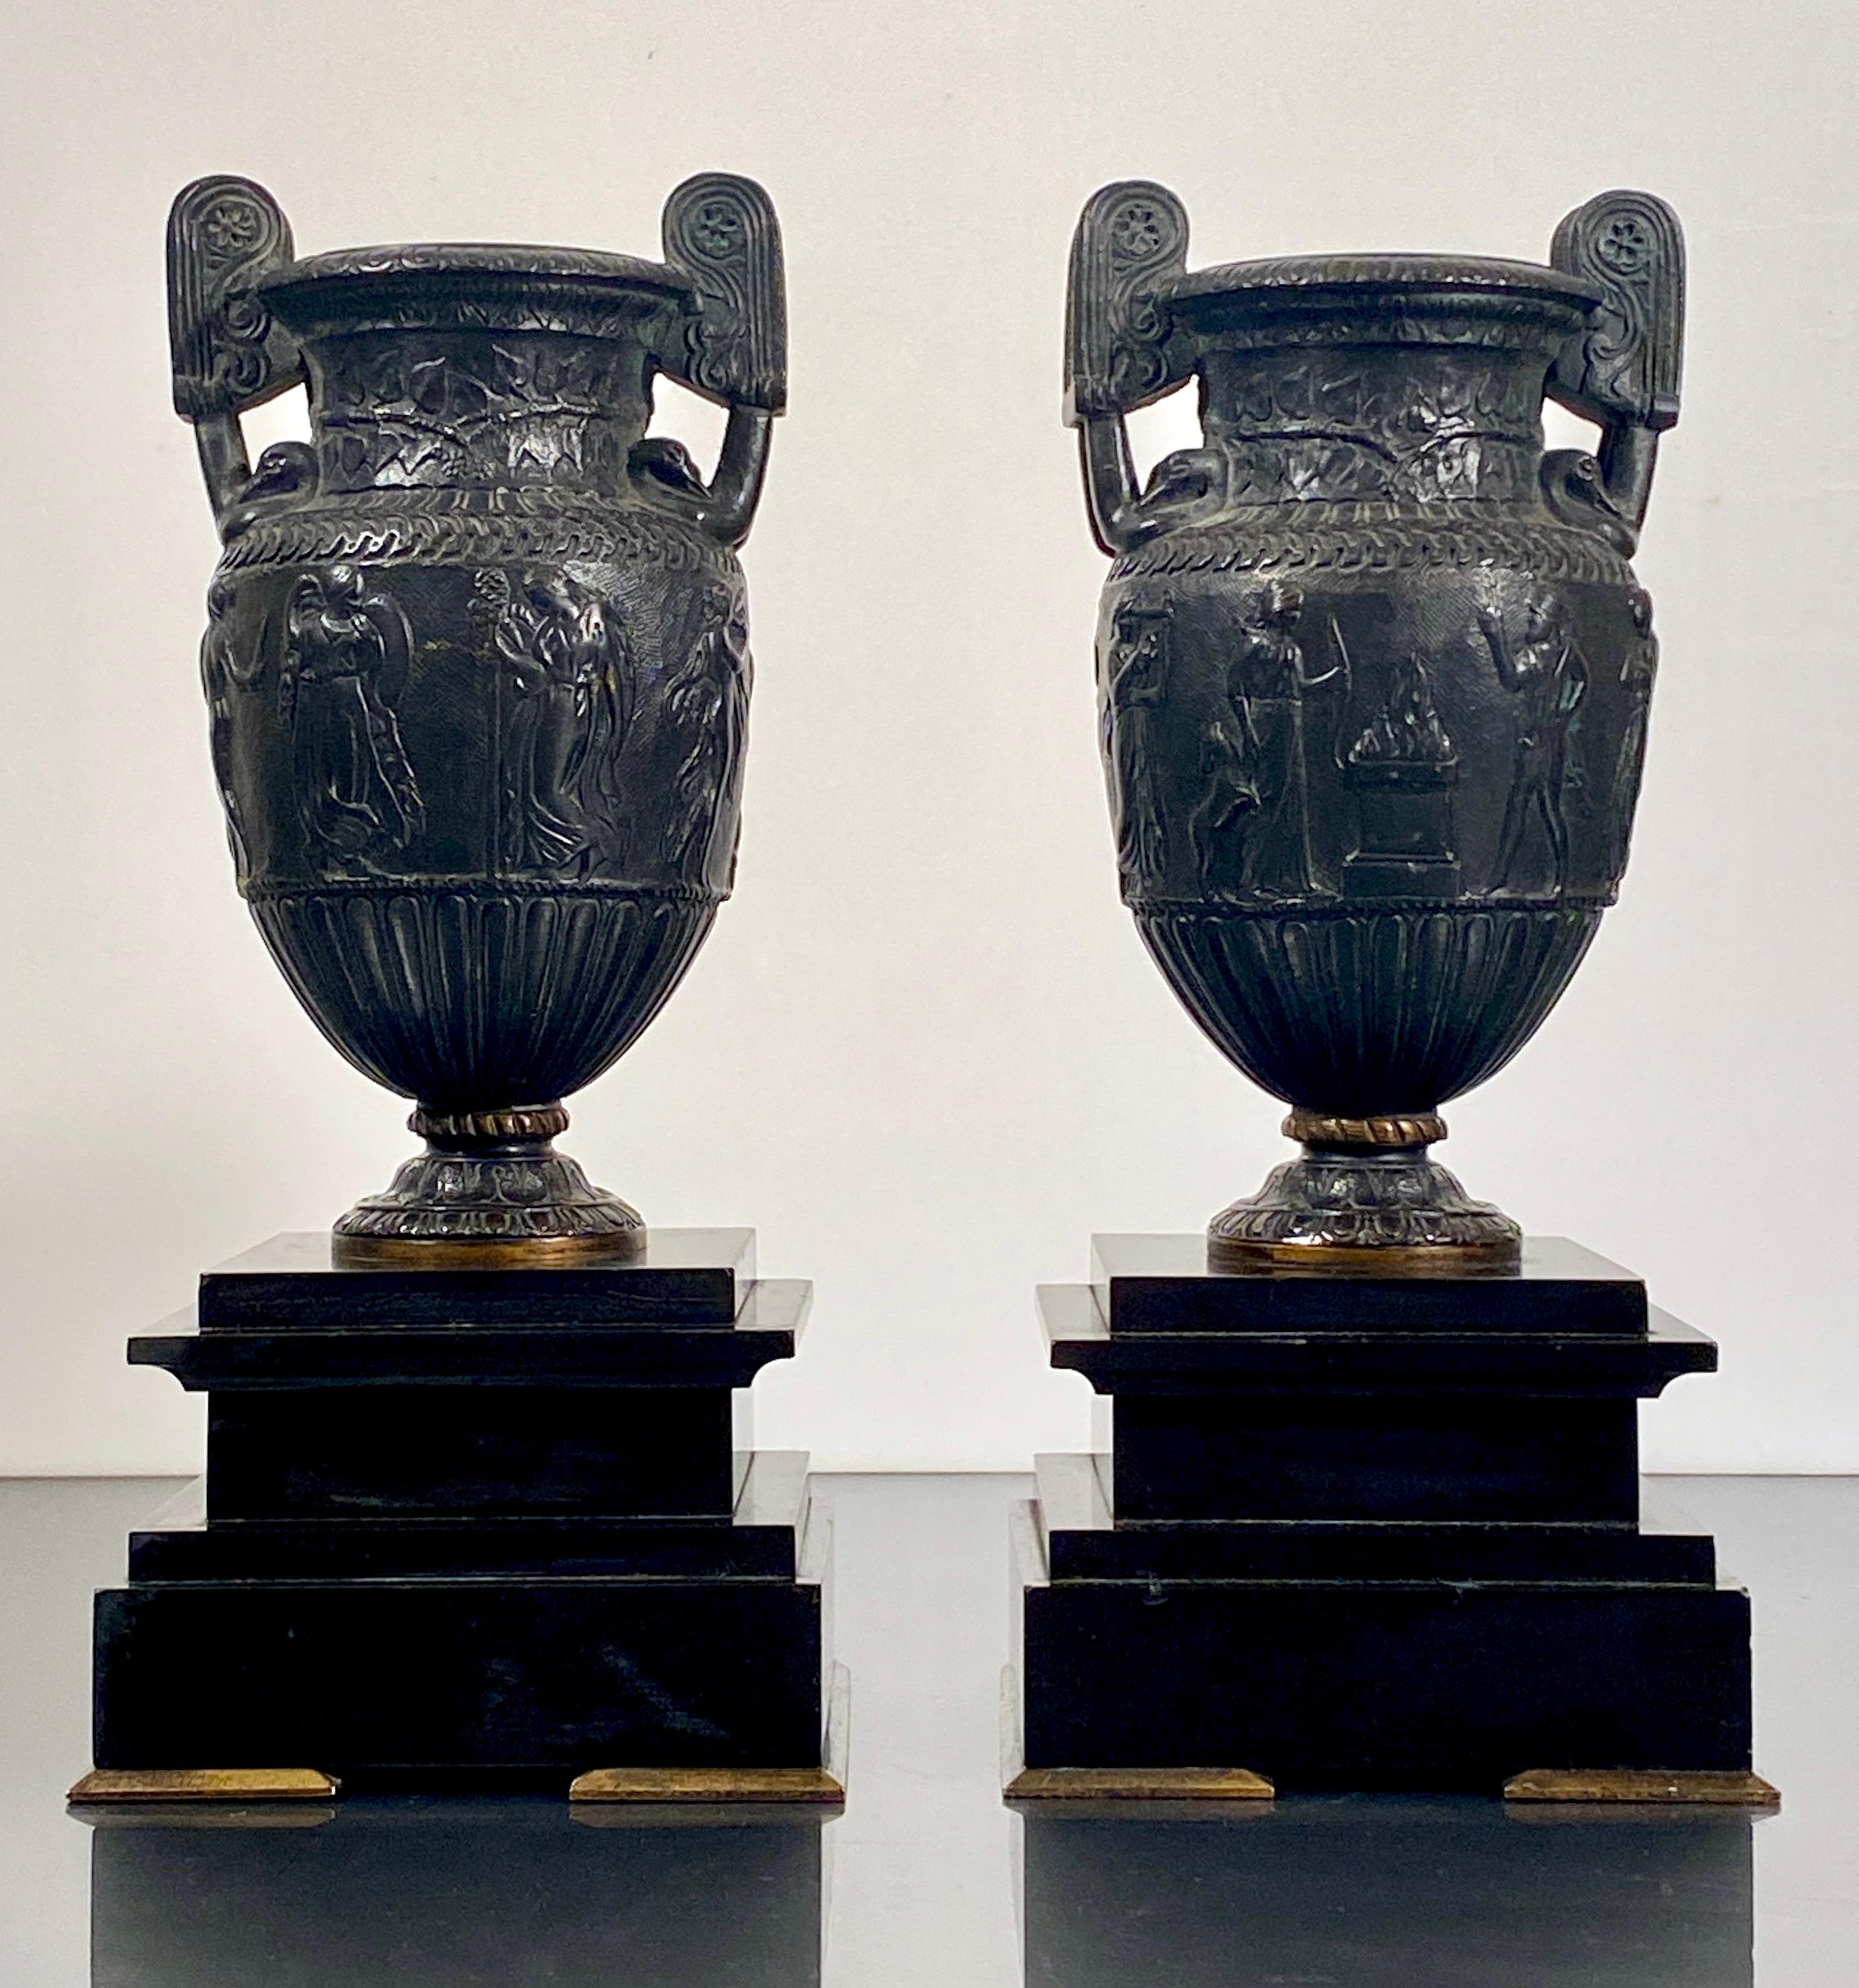 Bronze Sosibios Volute Urns on Slate Plinths

A pair of French bronze Sosibios volute krater neo classical urns.
Beautiful classical design with each vase is of krater form with a bas-relief figural frieze decoration depicting Artemis and Hermes and